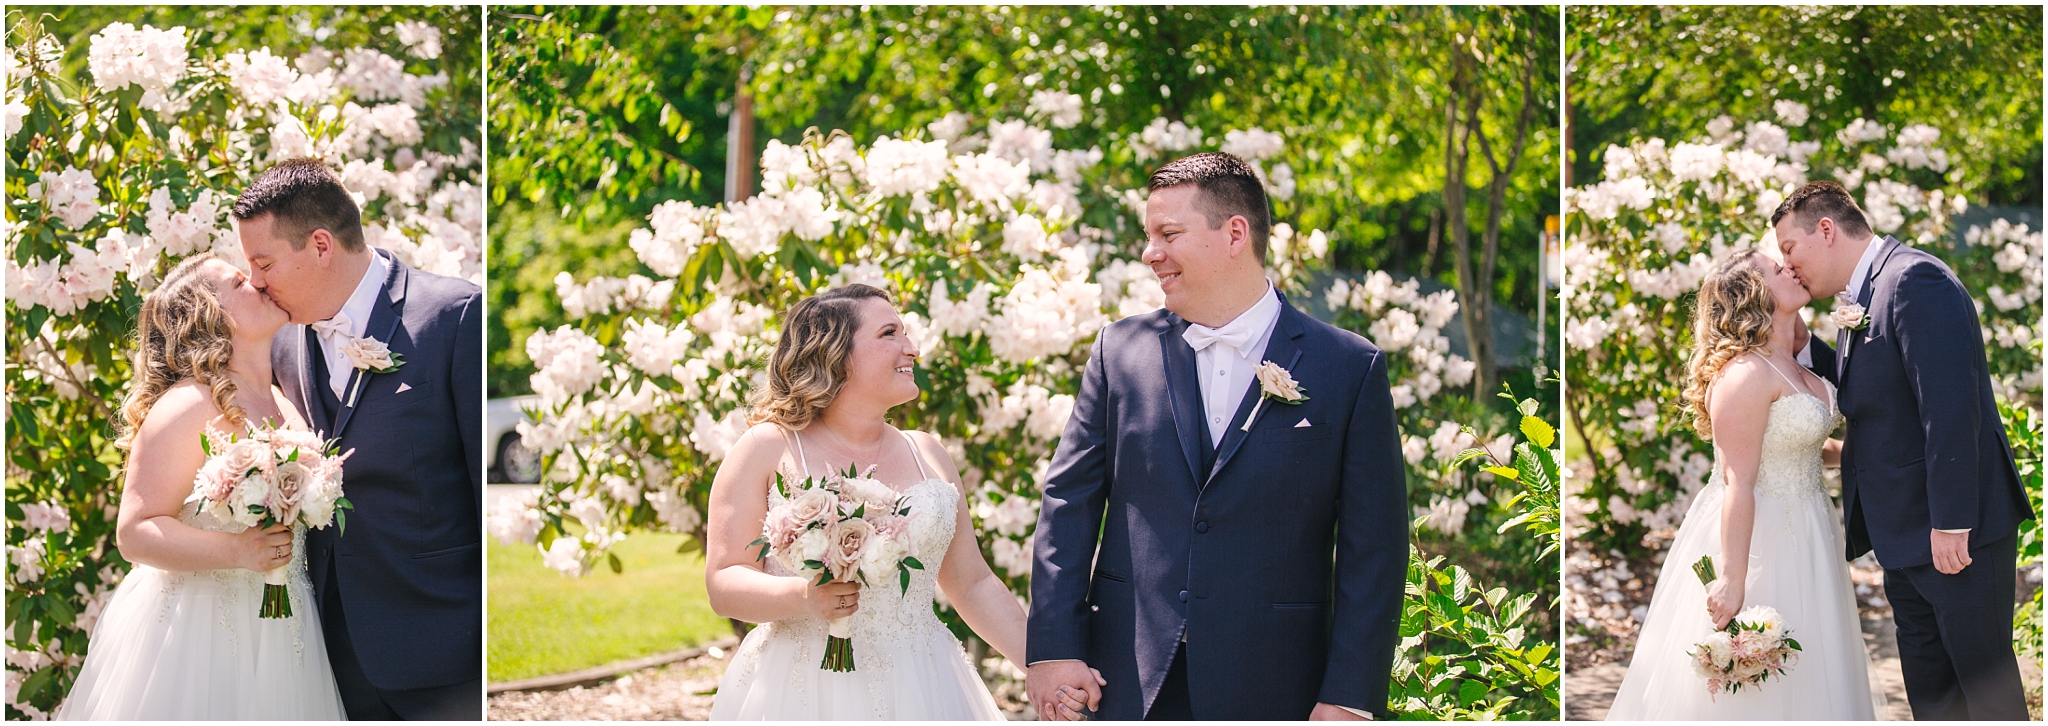 Spring wedding portraits at Issaquah Salmon Hatchery surrounded by blooms